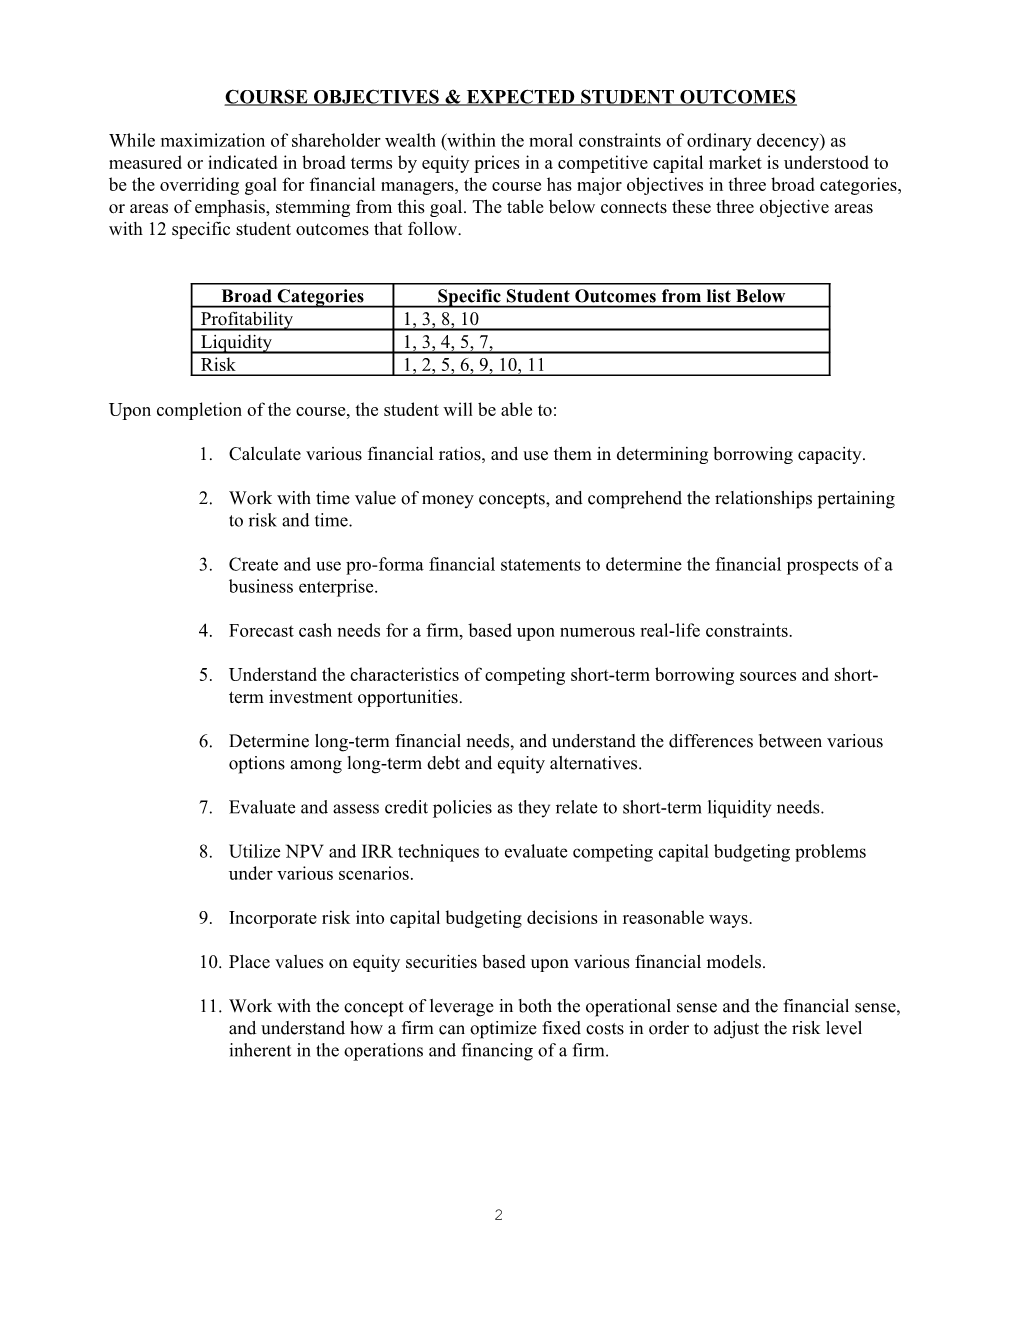 FIN 405-All IAV Sections: CASE PROBLEMS in MANAGERIAL FINANCE